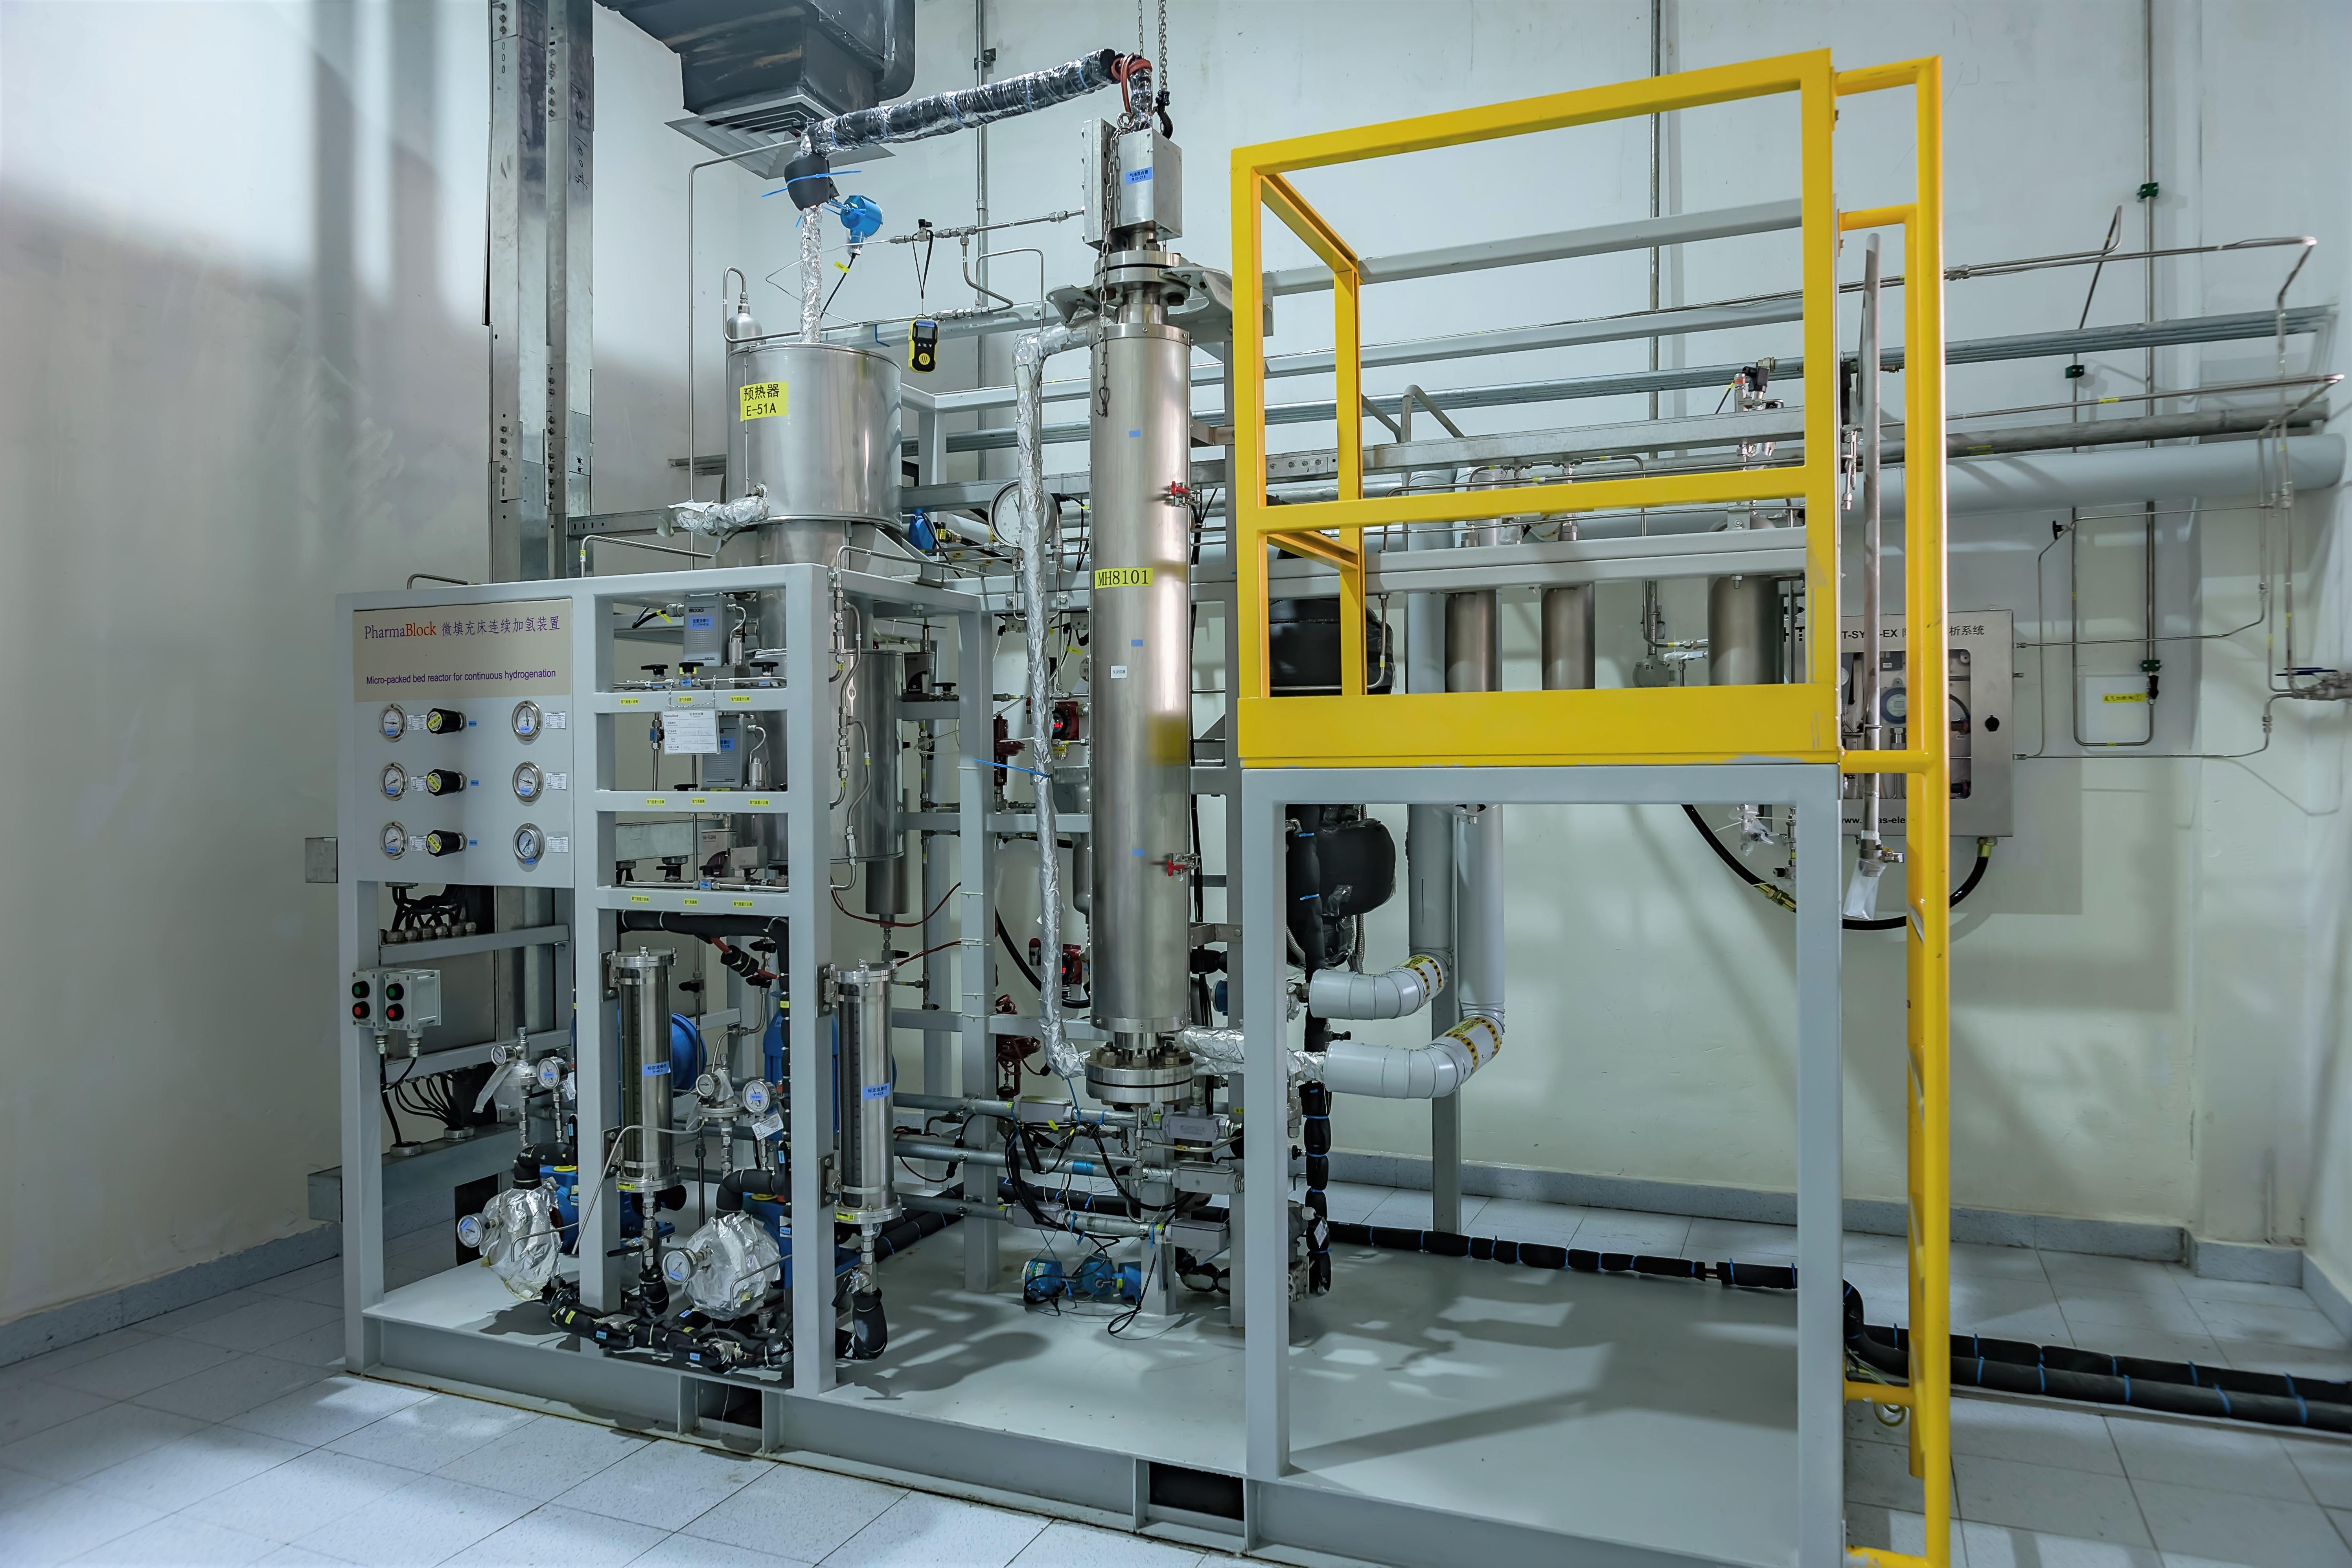 Micropacked bed reactor at Pharmablock